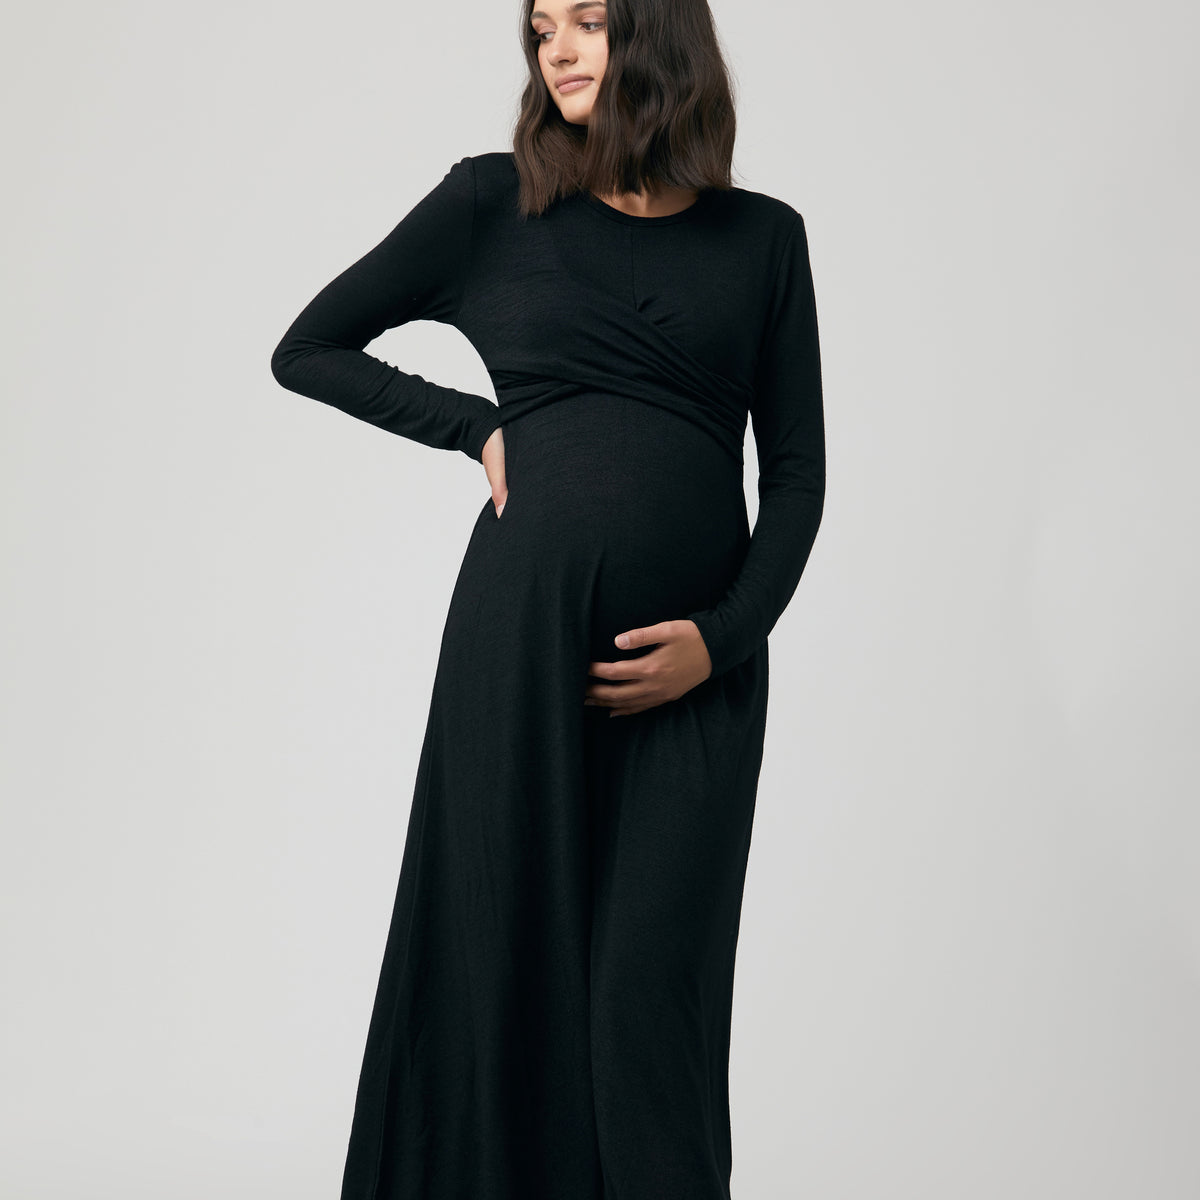 Armoire  Rent this Soon Maternity Tara Twisted Front Flare Maternity Dress